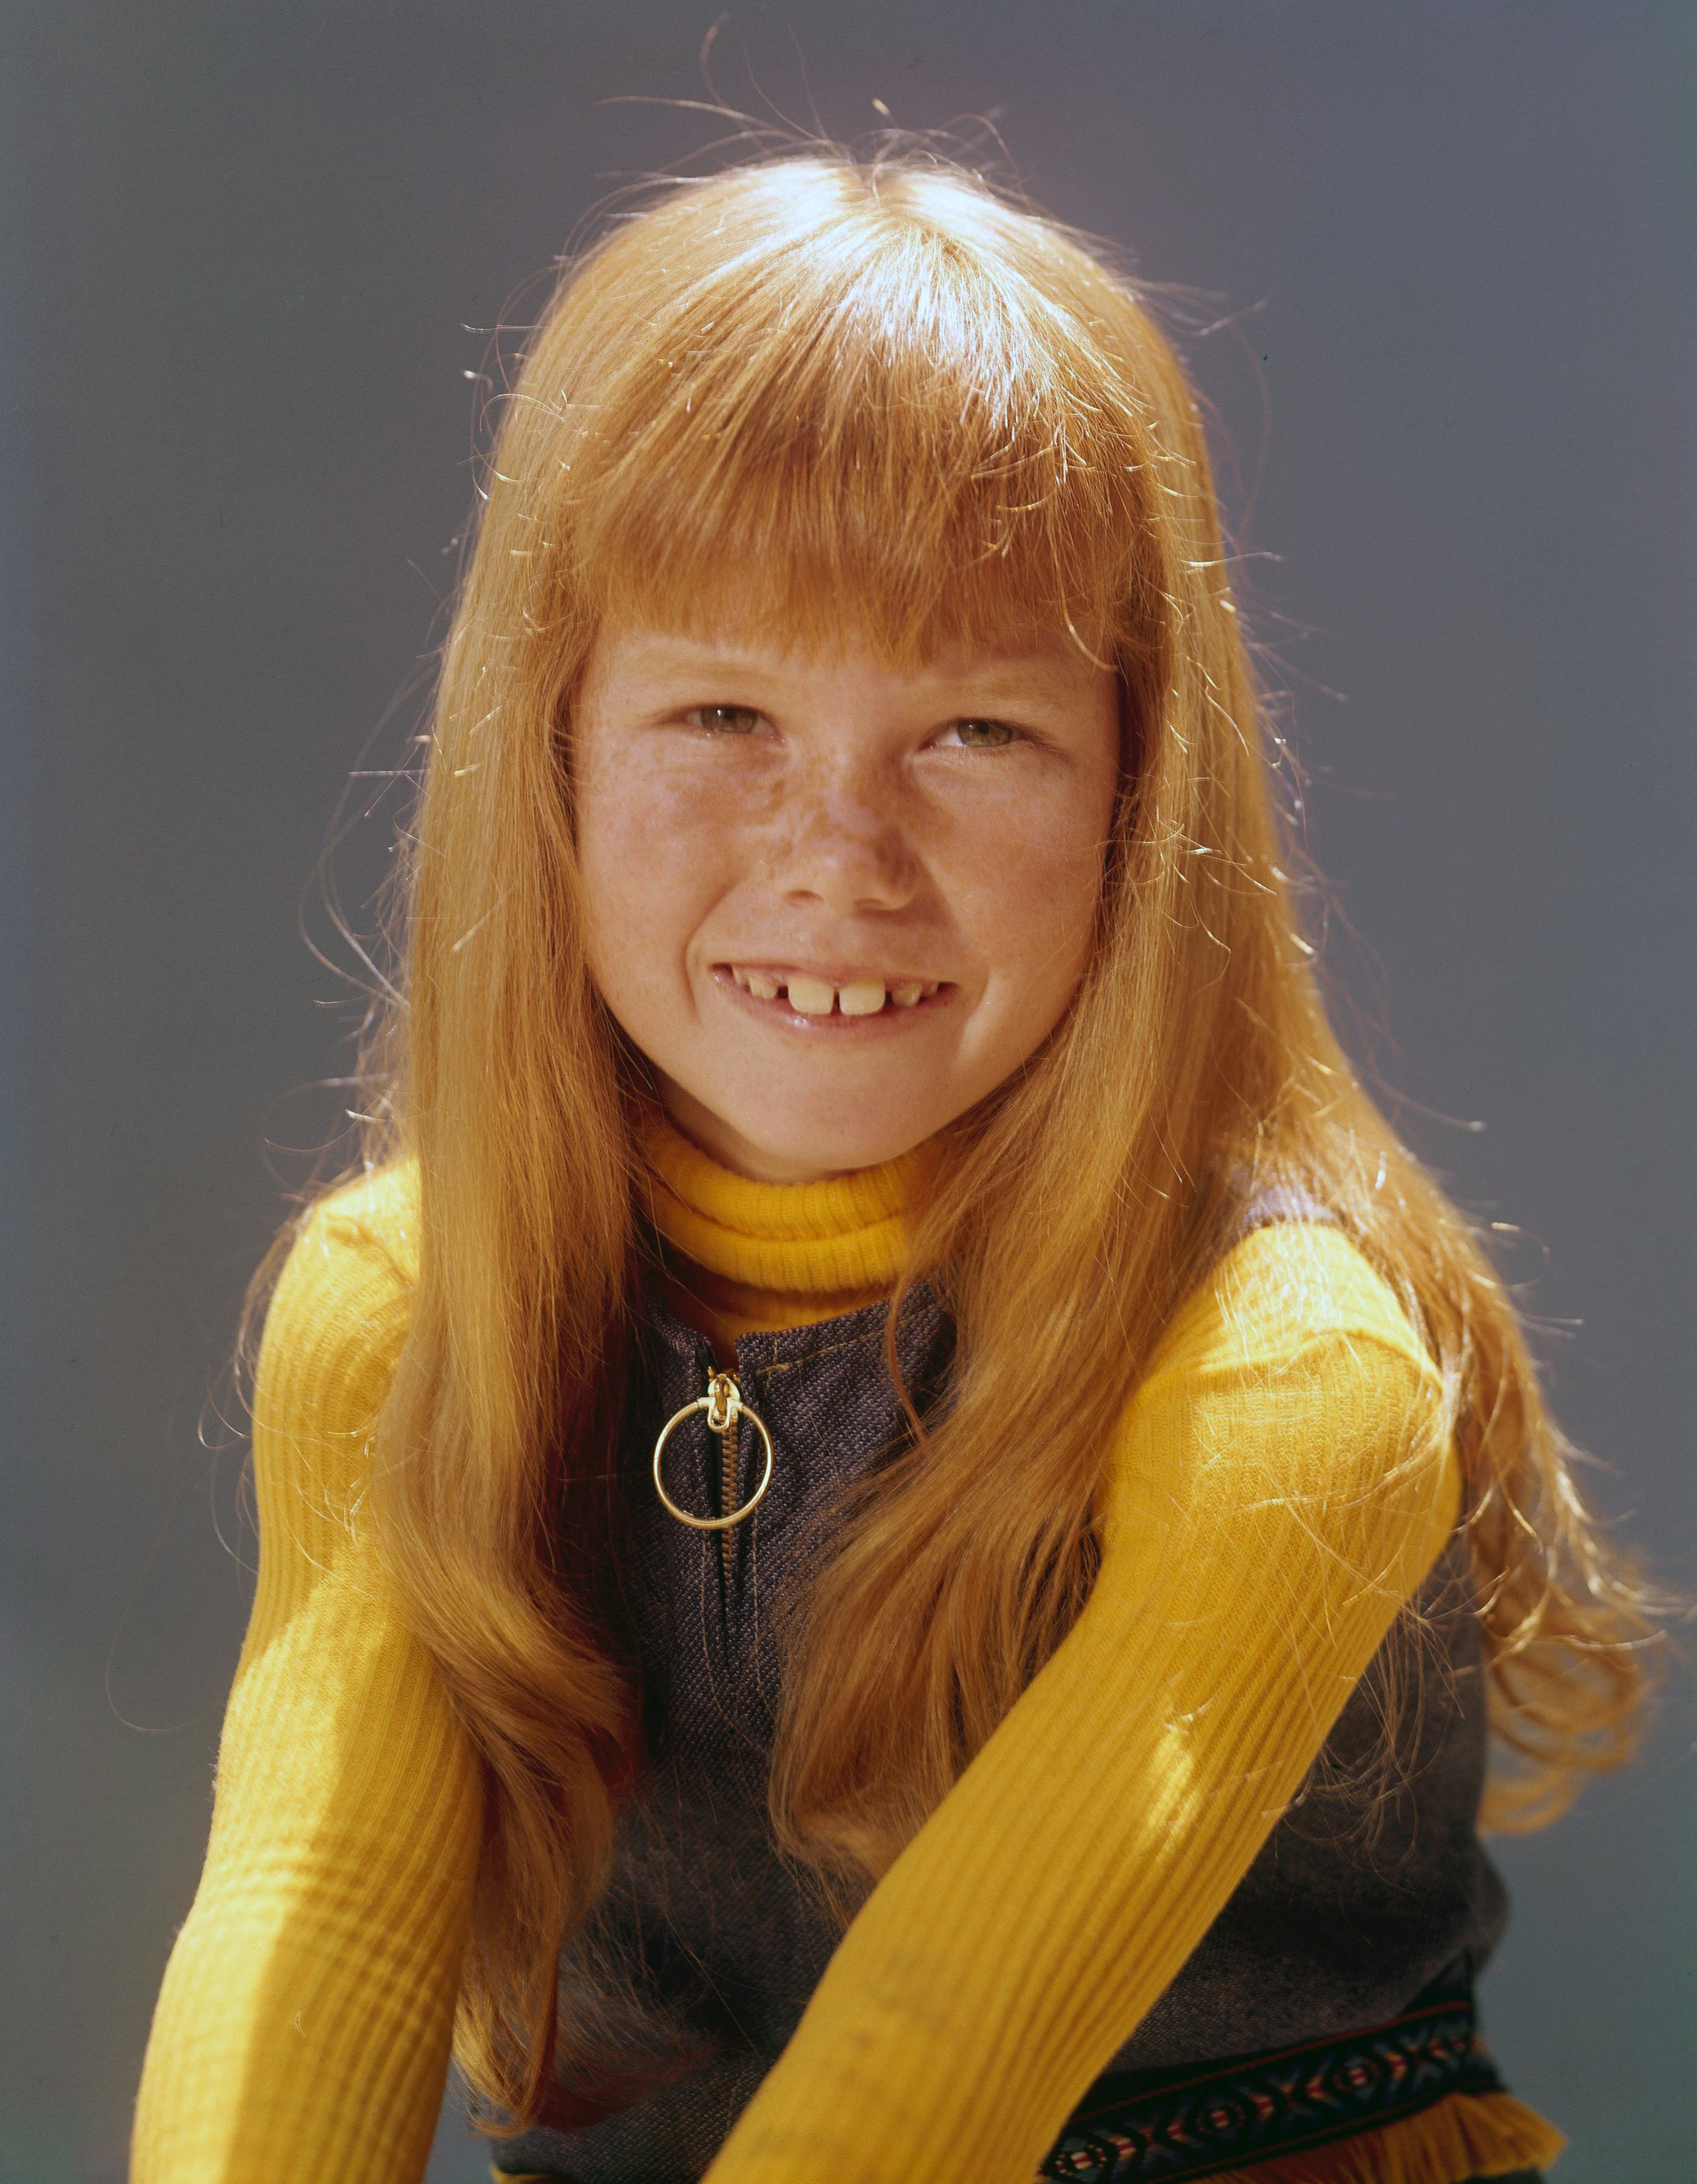 Suzanne Crough aka Tracy Partridge from "The Partridge Family" | Source: Getty Images